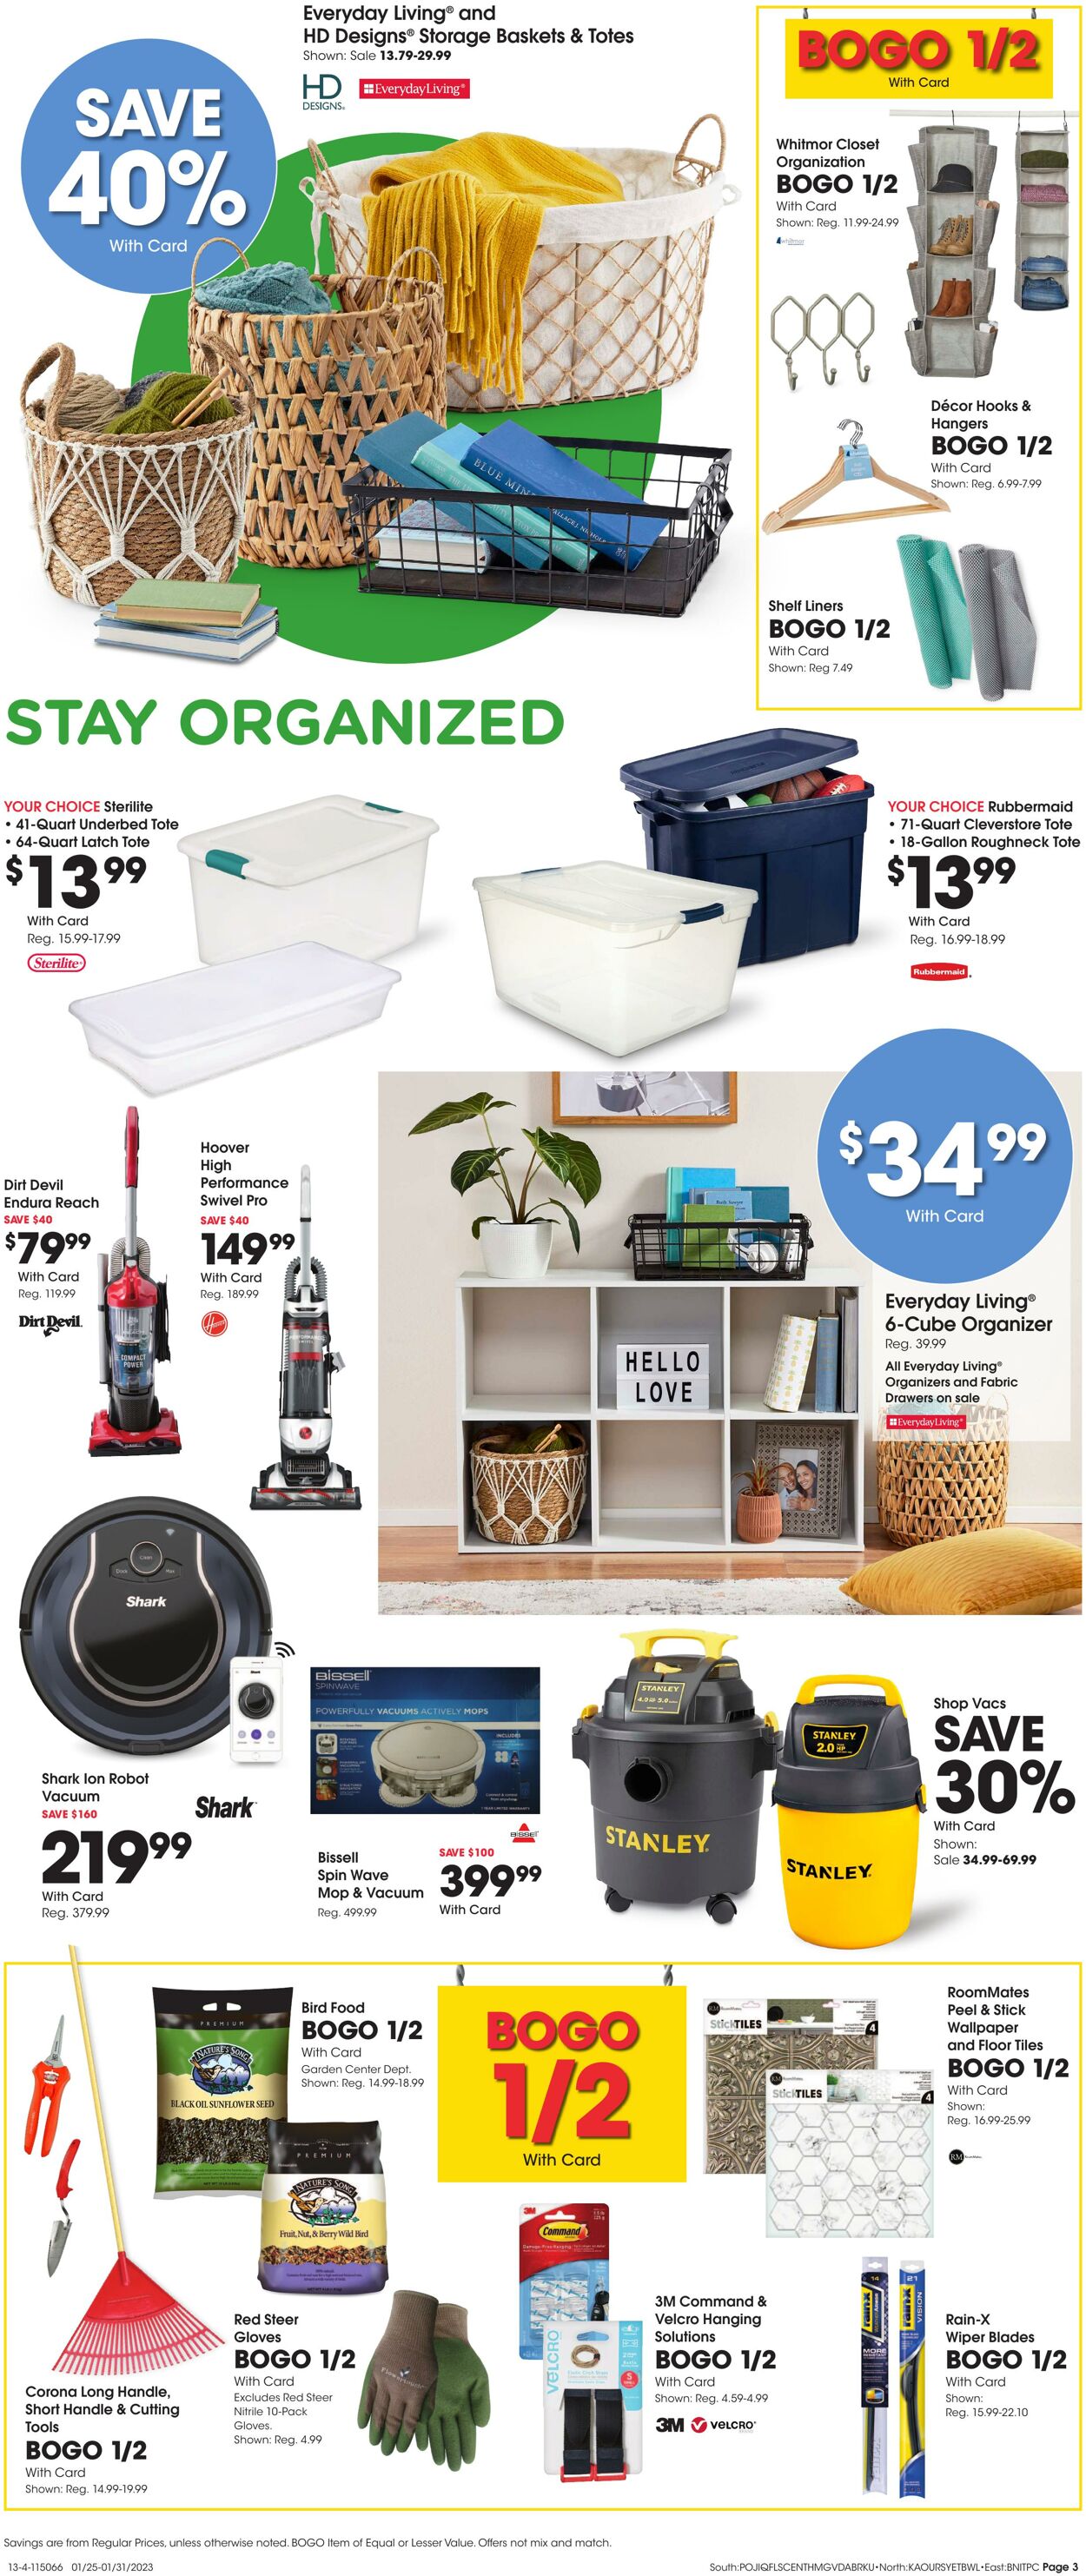 Weekly ad Fred Meyer 01/25/2023 - 01/31/2023